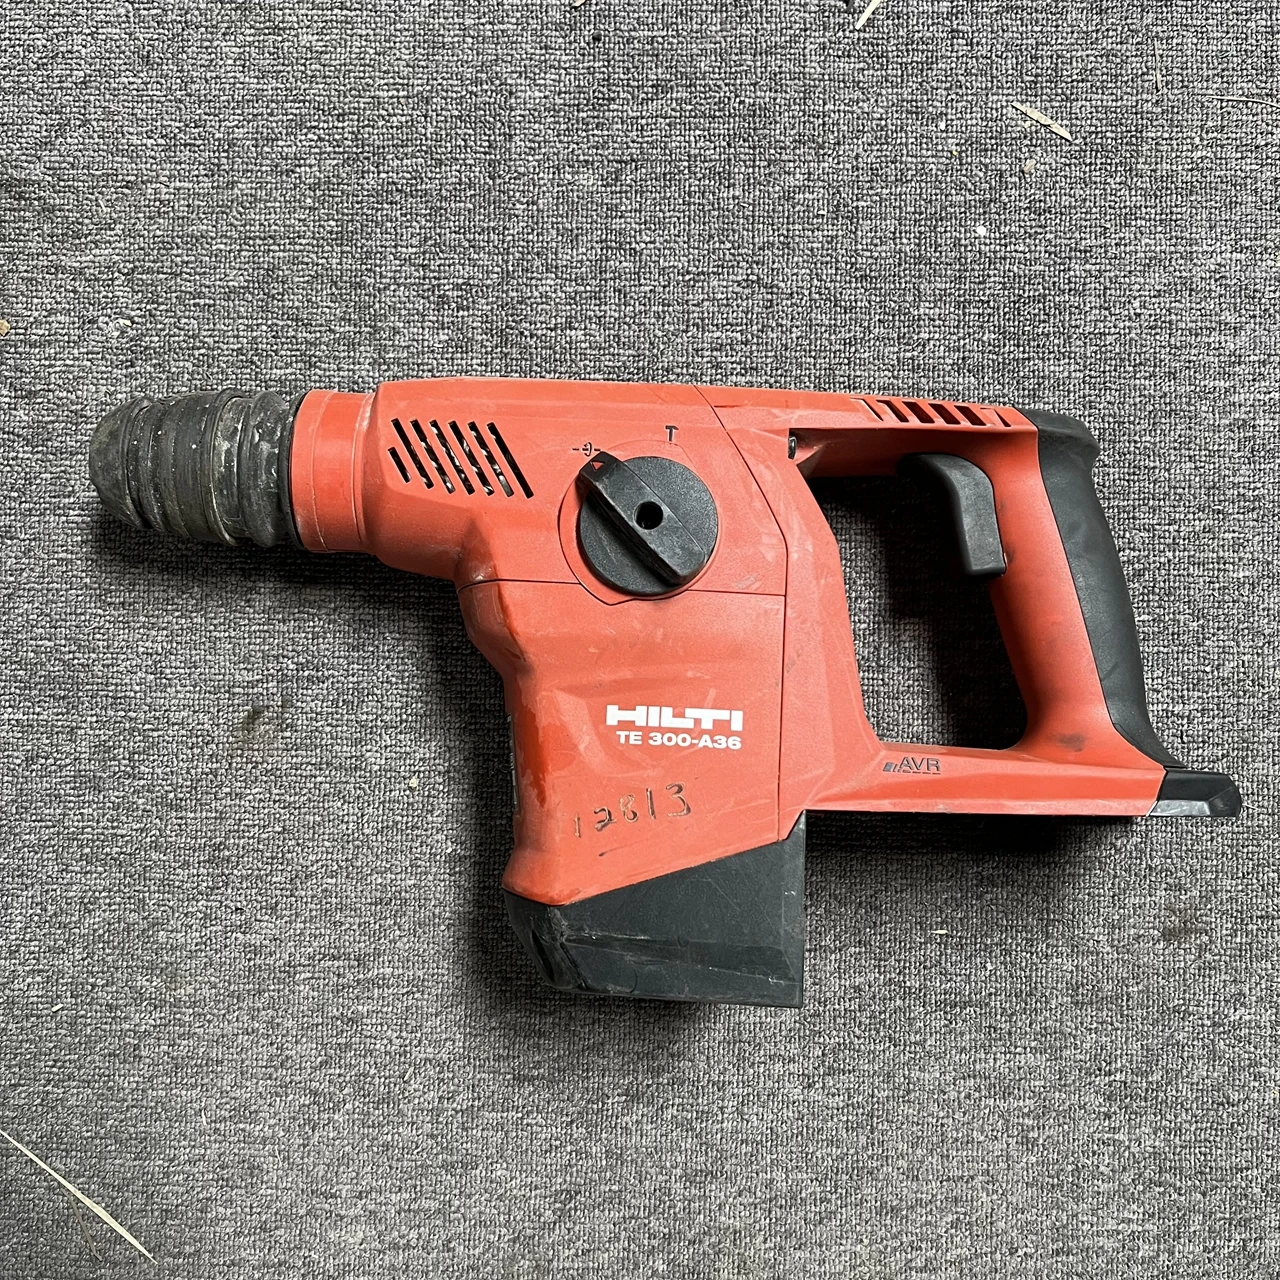 HILTI TE300-A36 Corded Demolition Hammer Breaker ,tools only second-hand